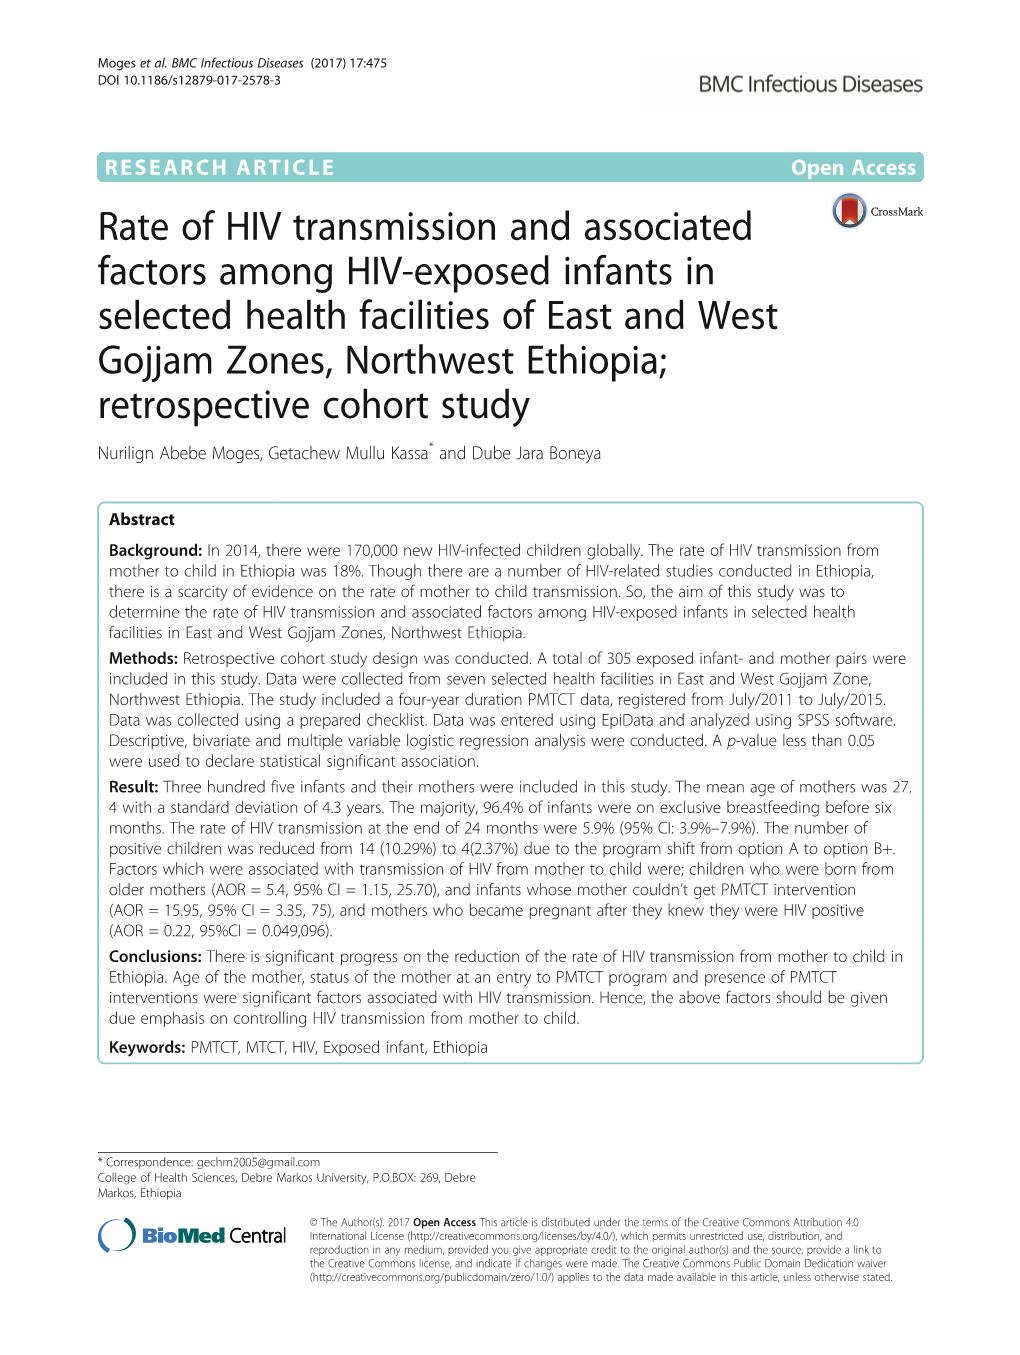 Rate of HIV Transmission and Associated Factors Among HIV